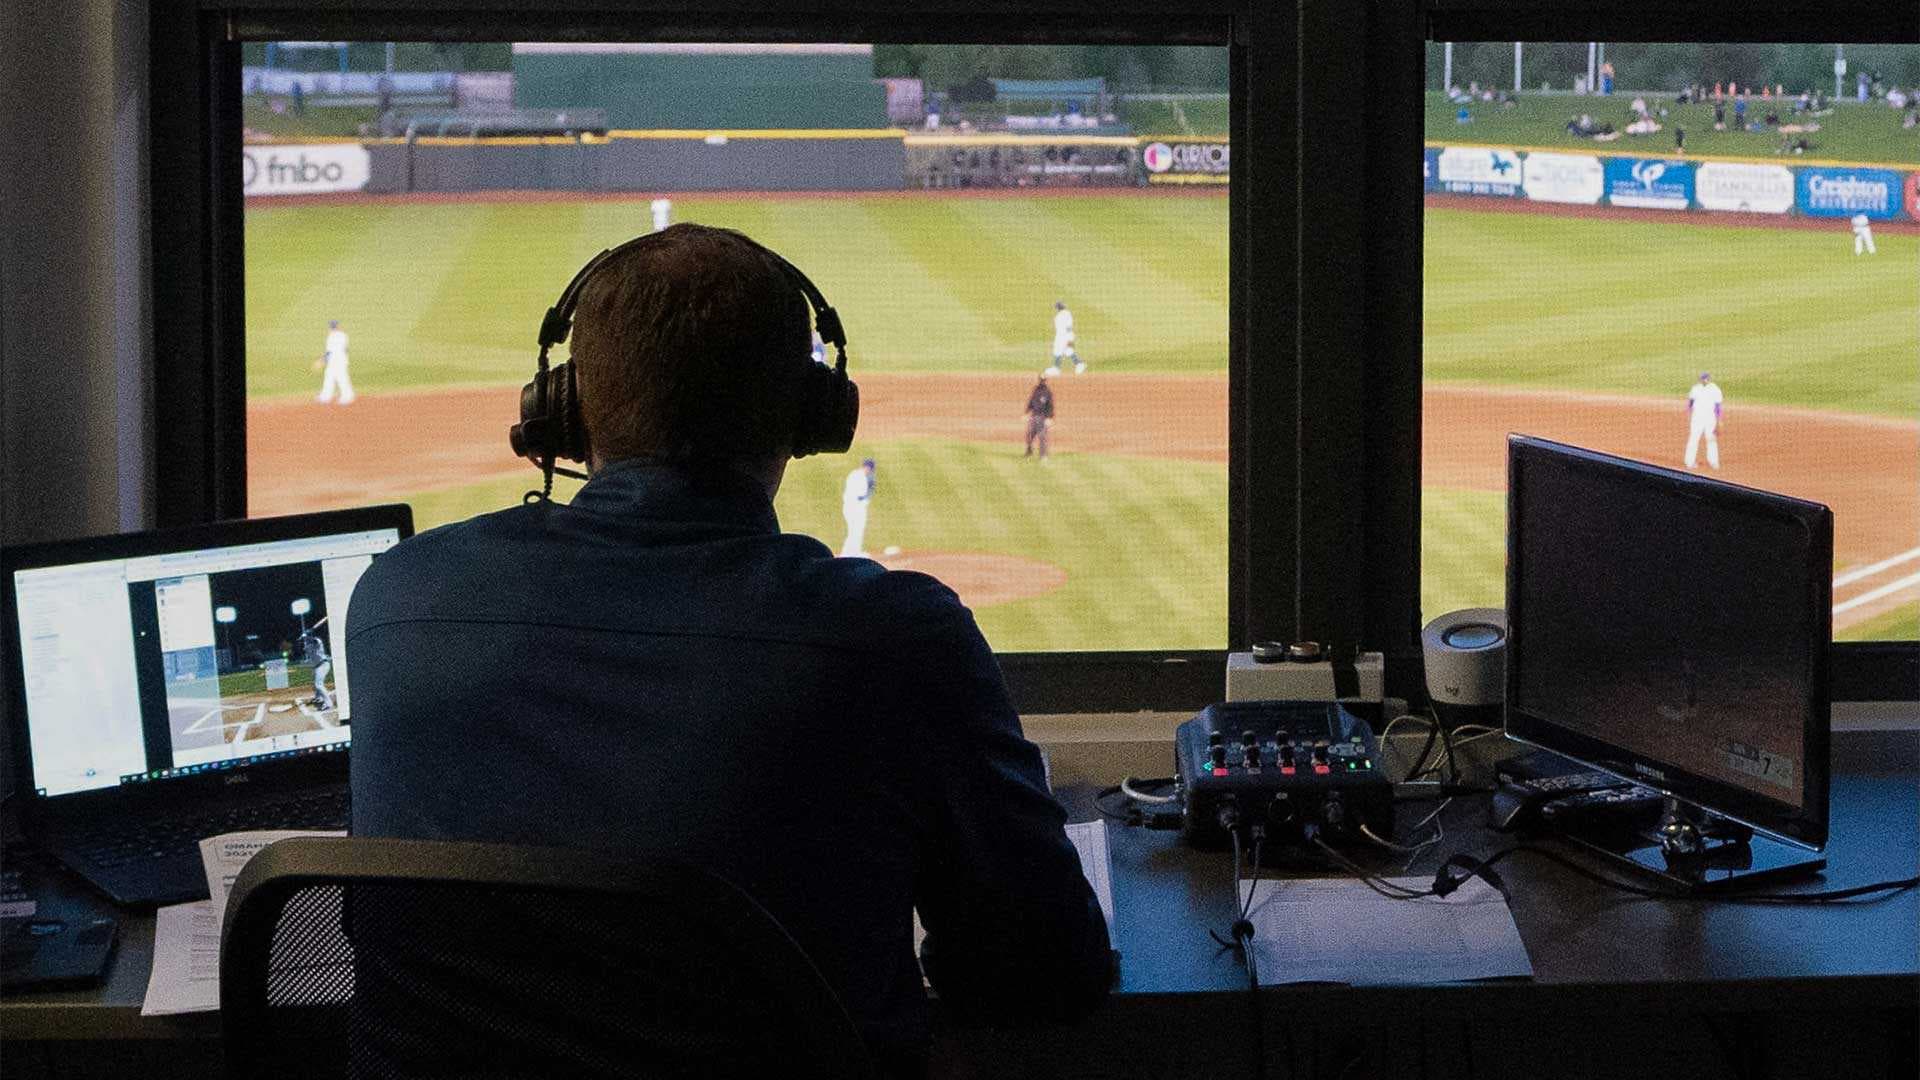 Jake Eisenberg in the broadcast booth at baseball game